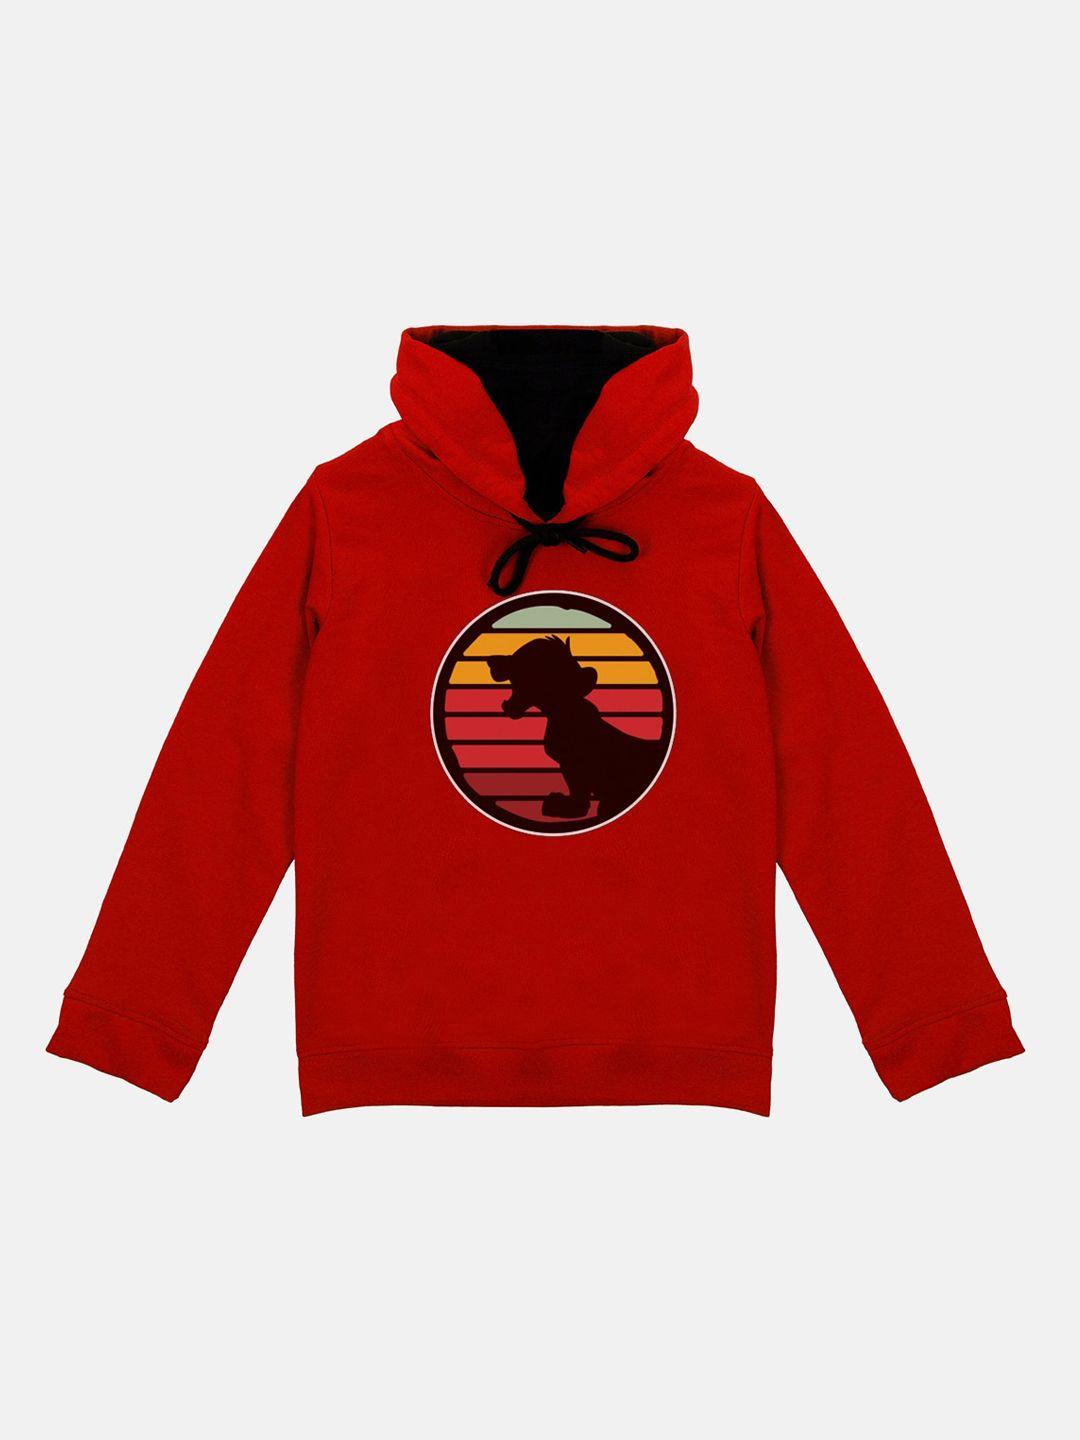 disney by wear your mind boys red printed hooded sweatshirt with attached face covering